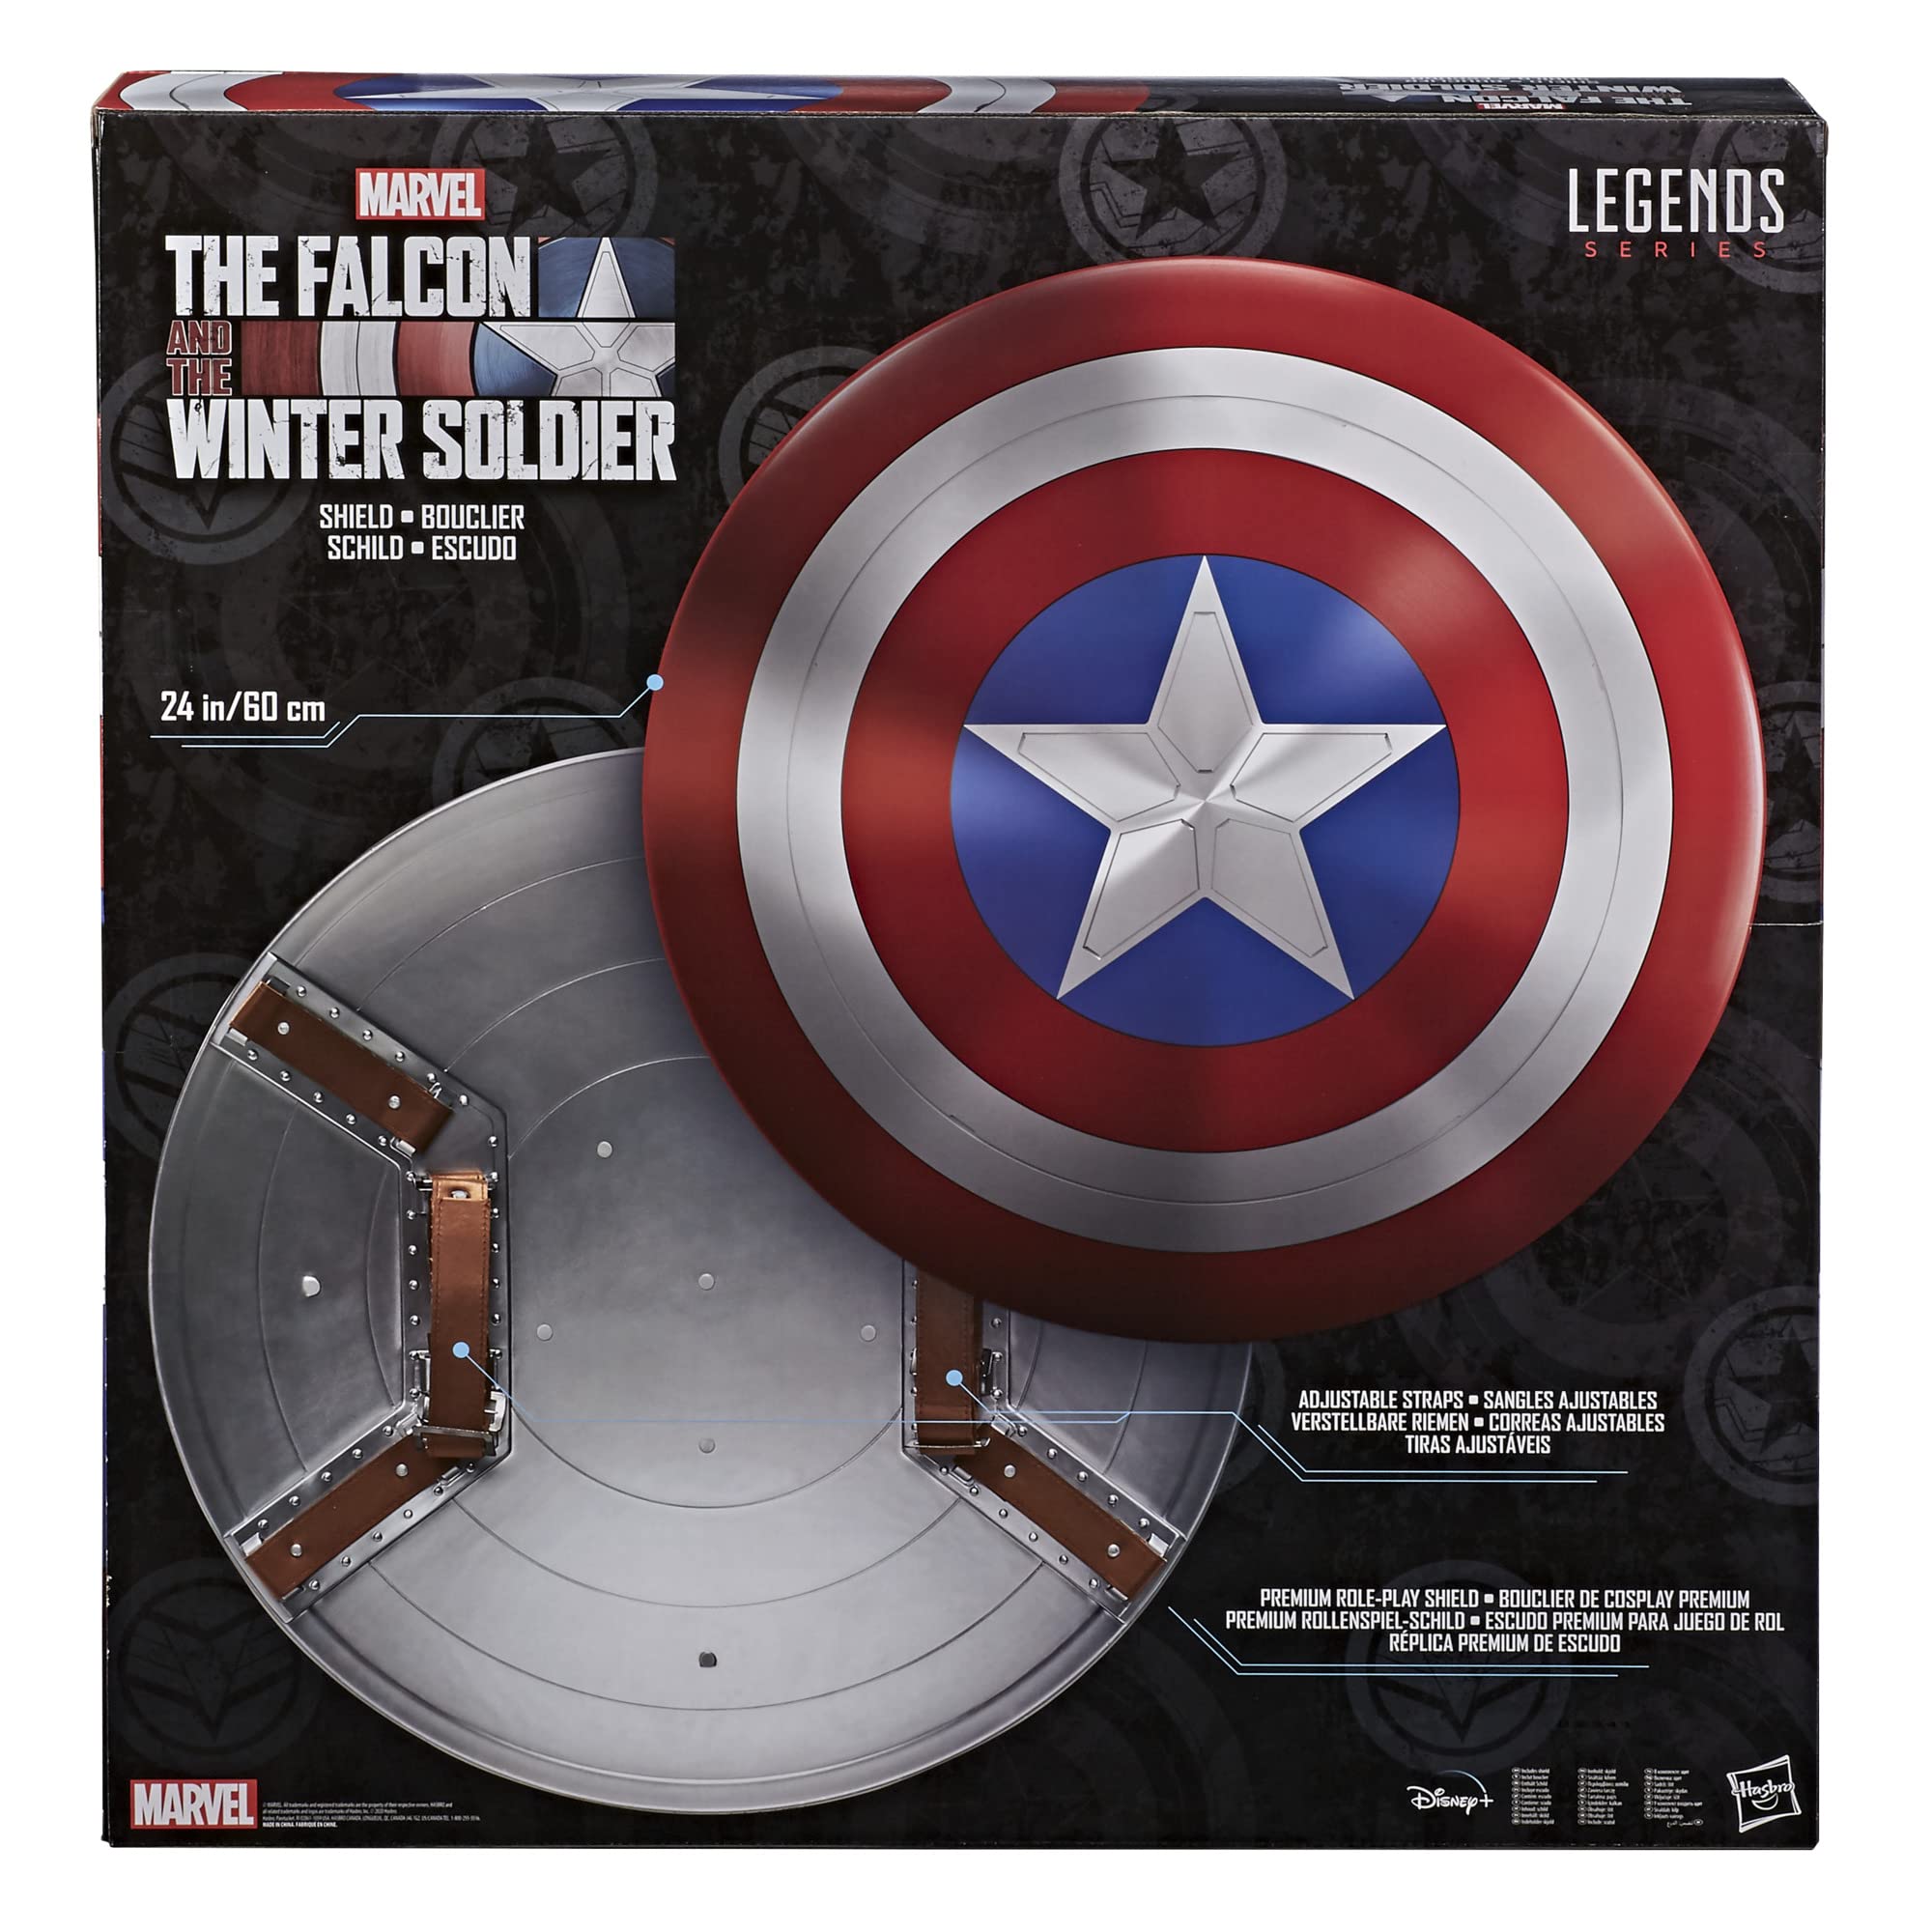 Hasbro Marvel Legends Series Avengers Falcon And Winter Soldier Captain America Premium Role Play Shield -Adult Fan -Costume/Collectible , Red